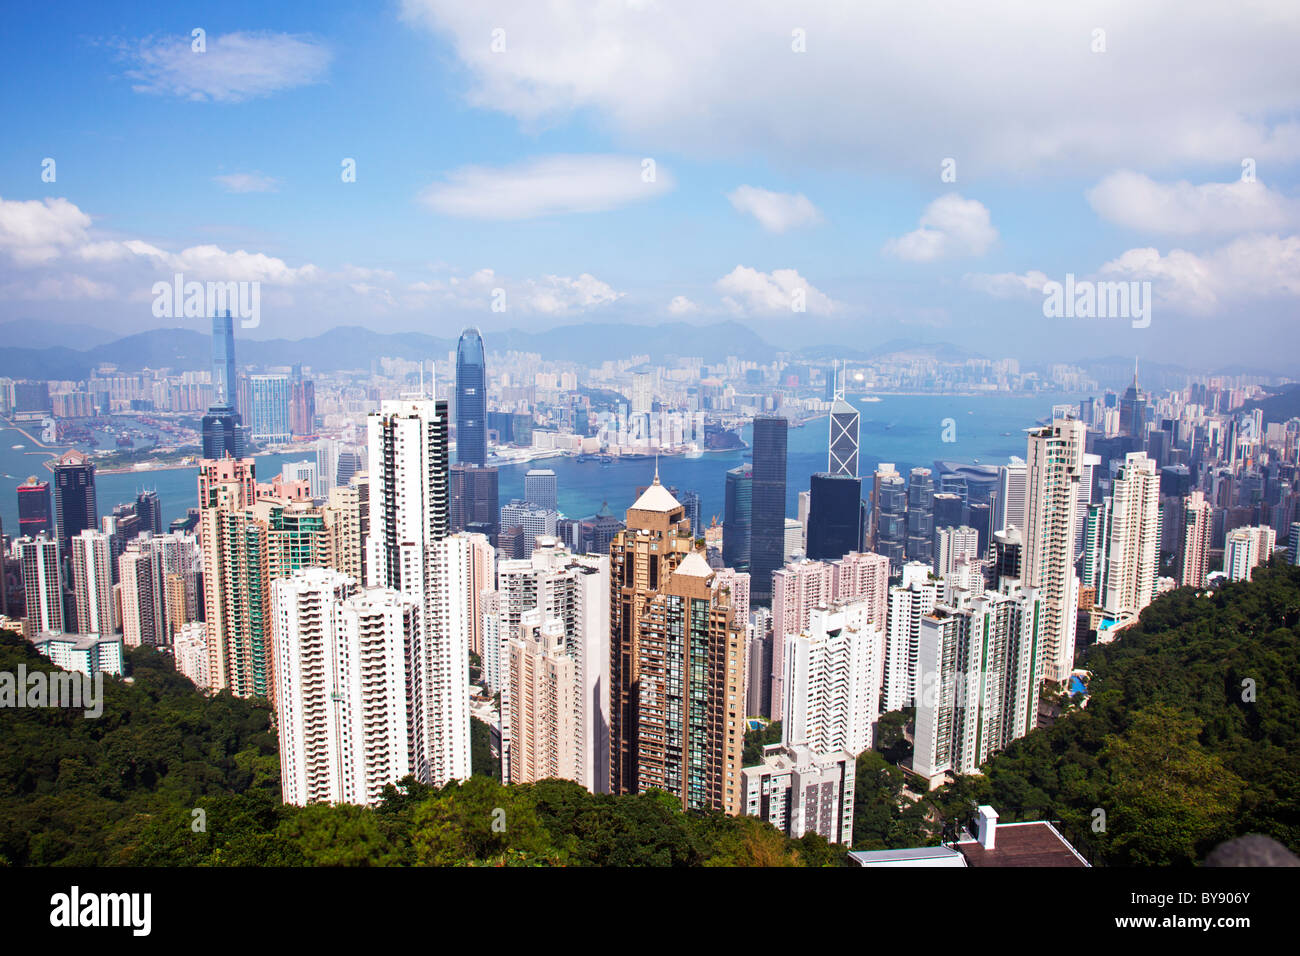 Victoria Peak, Hong Kong in the day, summer blue clear sky, taking in Kowloon and Victoria Harbour central finance district Stock Photo